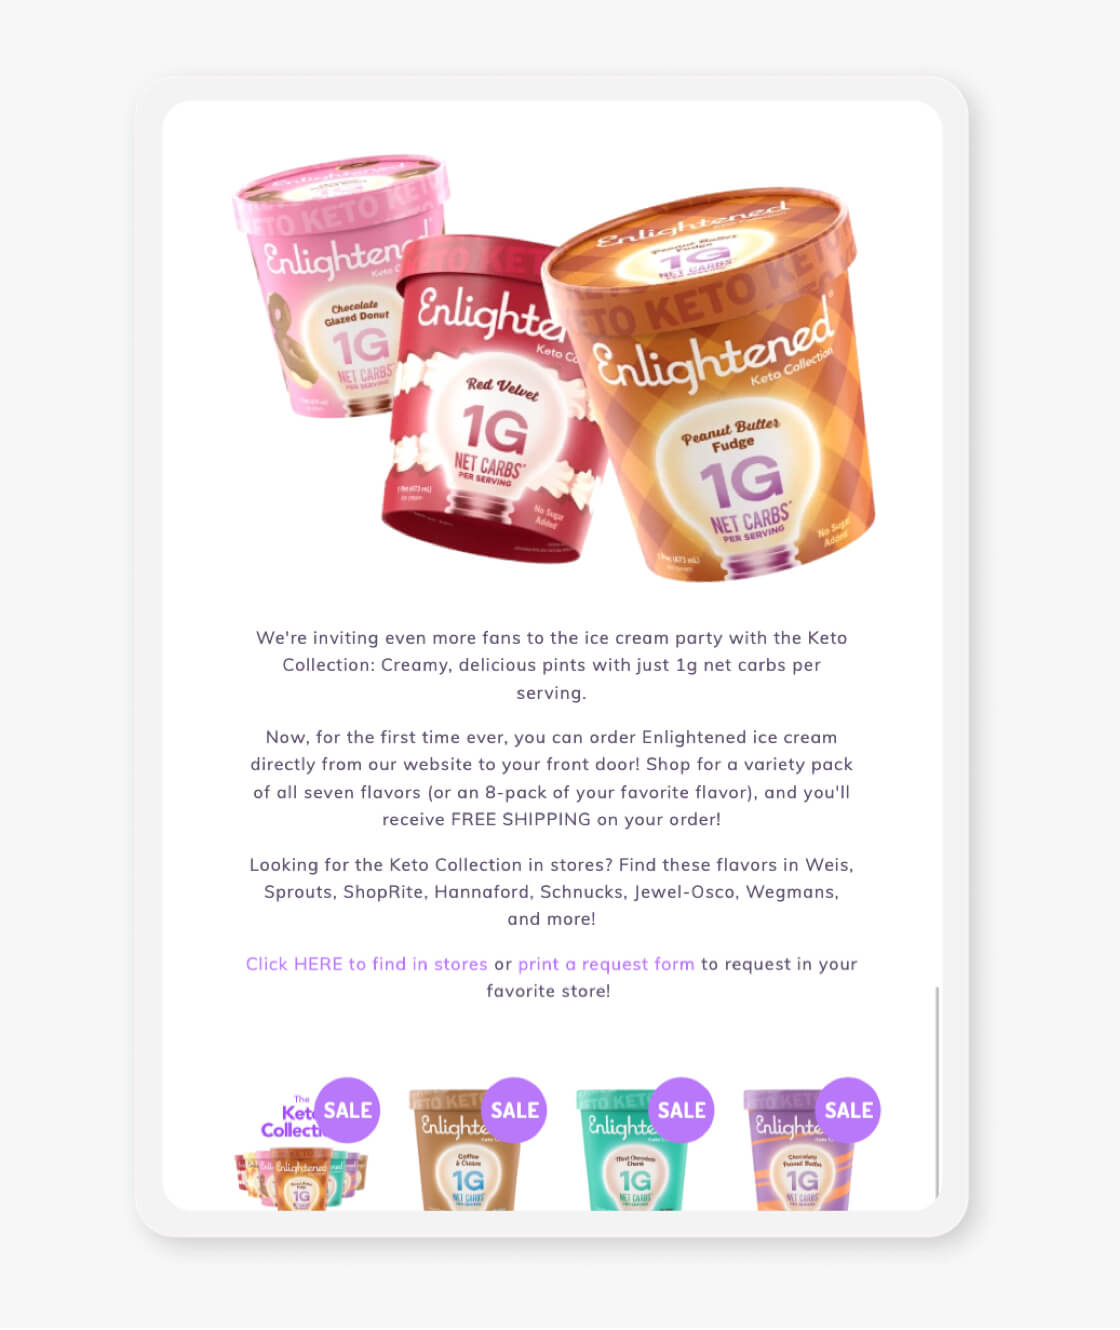 enlightened website keto collection announcement landing page on tablet